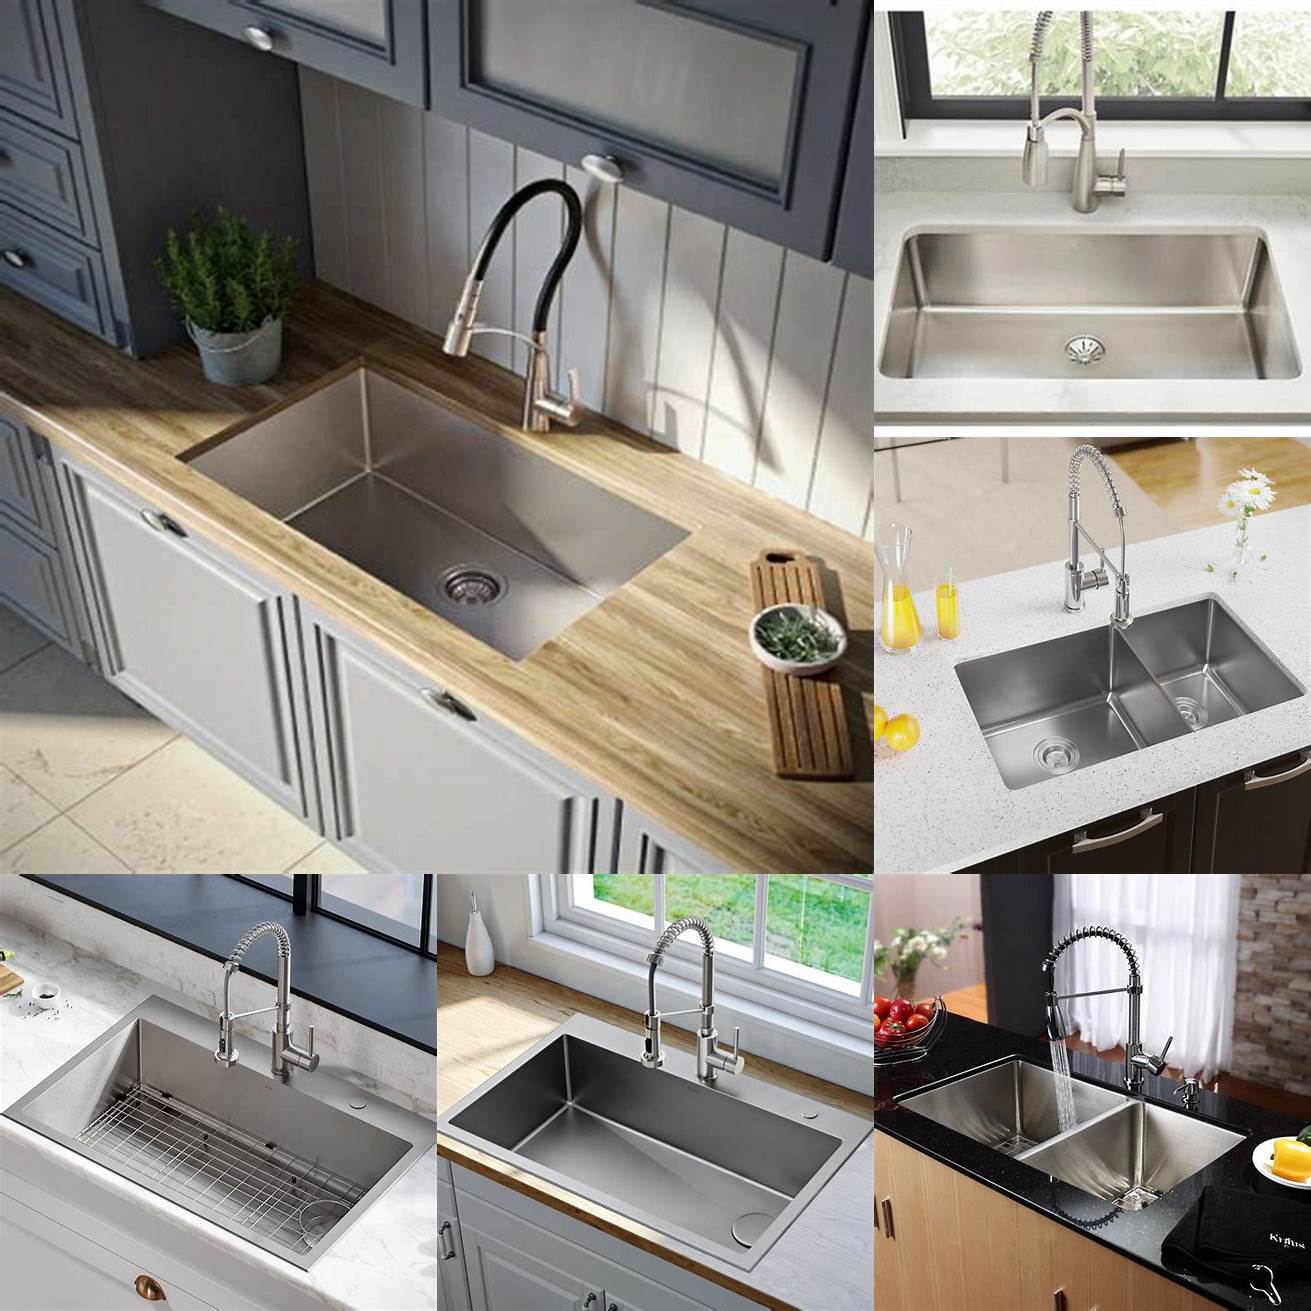 Affordable Compared to other sink materials stainless steel is relatively inexpensive You can find a quality stainless steel sink for a fraction of the cost of a porcelain or granite sink